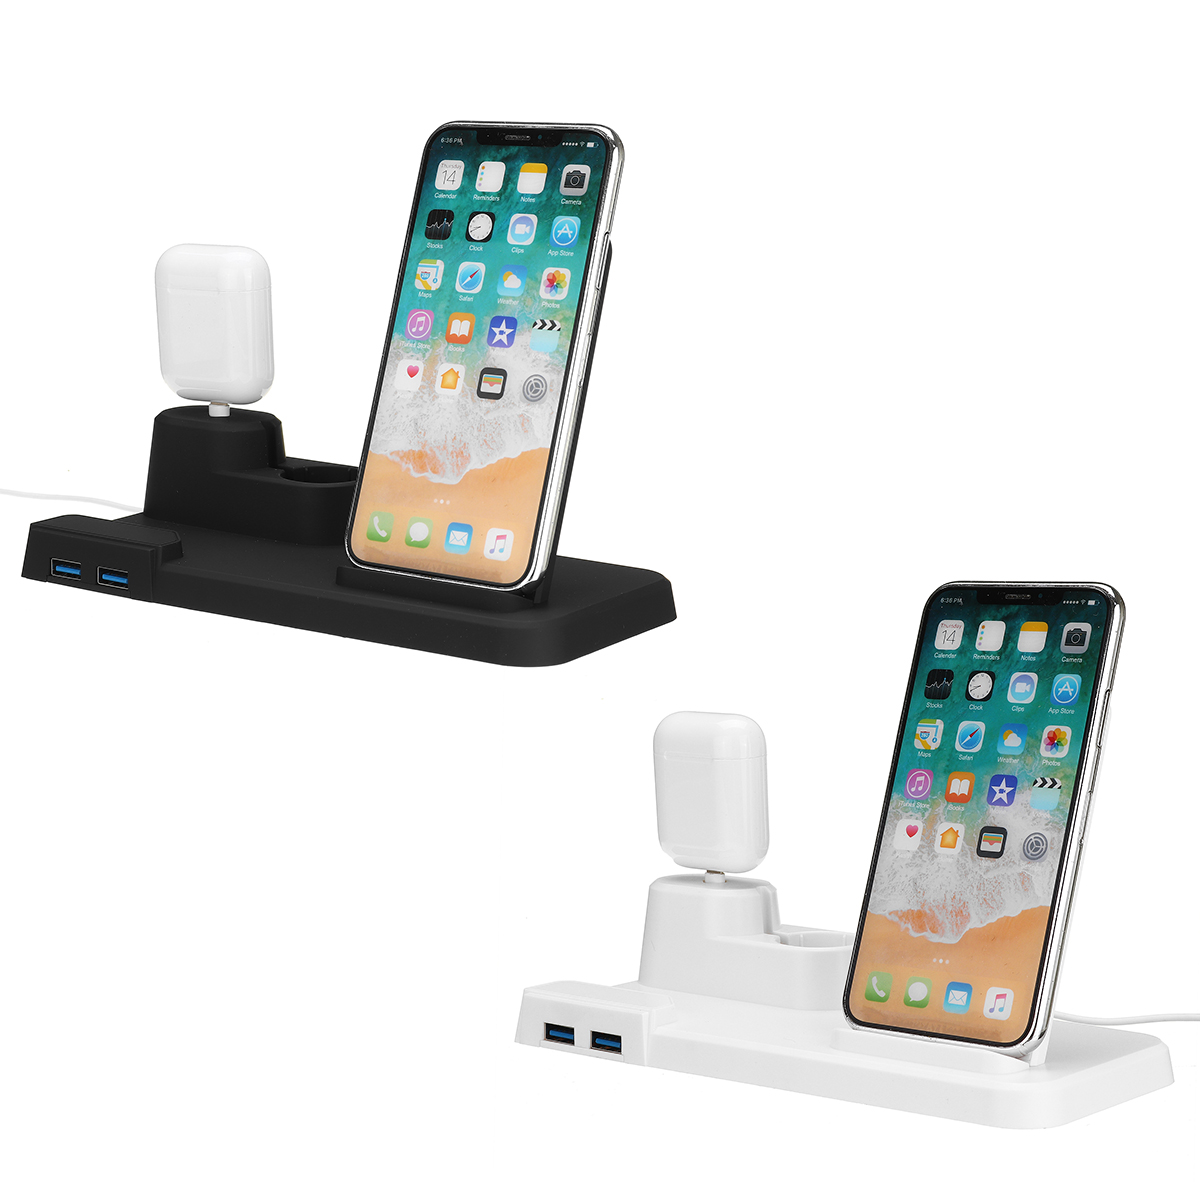 3-IN-1-Qi-Wireless-Charger-Charging-Stand-Dock-Mobile-Phone-Holder-Stand-for-iPhone-Airpods-iWatch-1790259-4